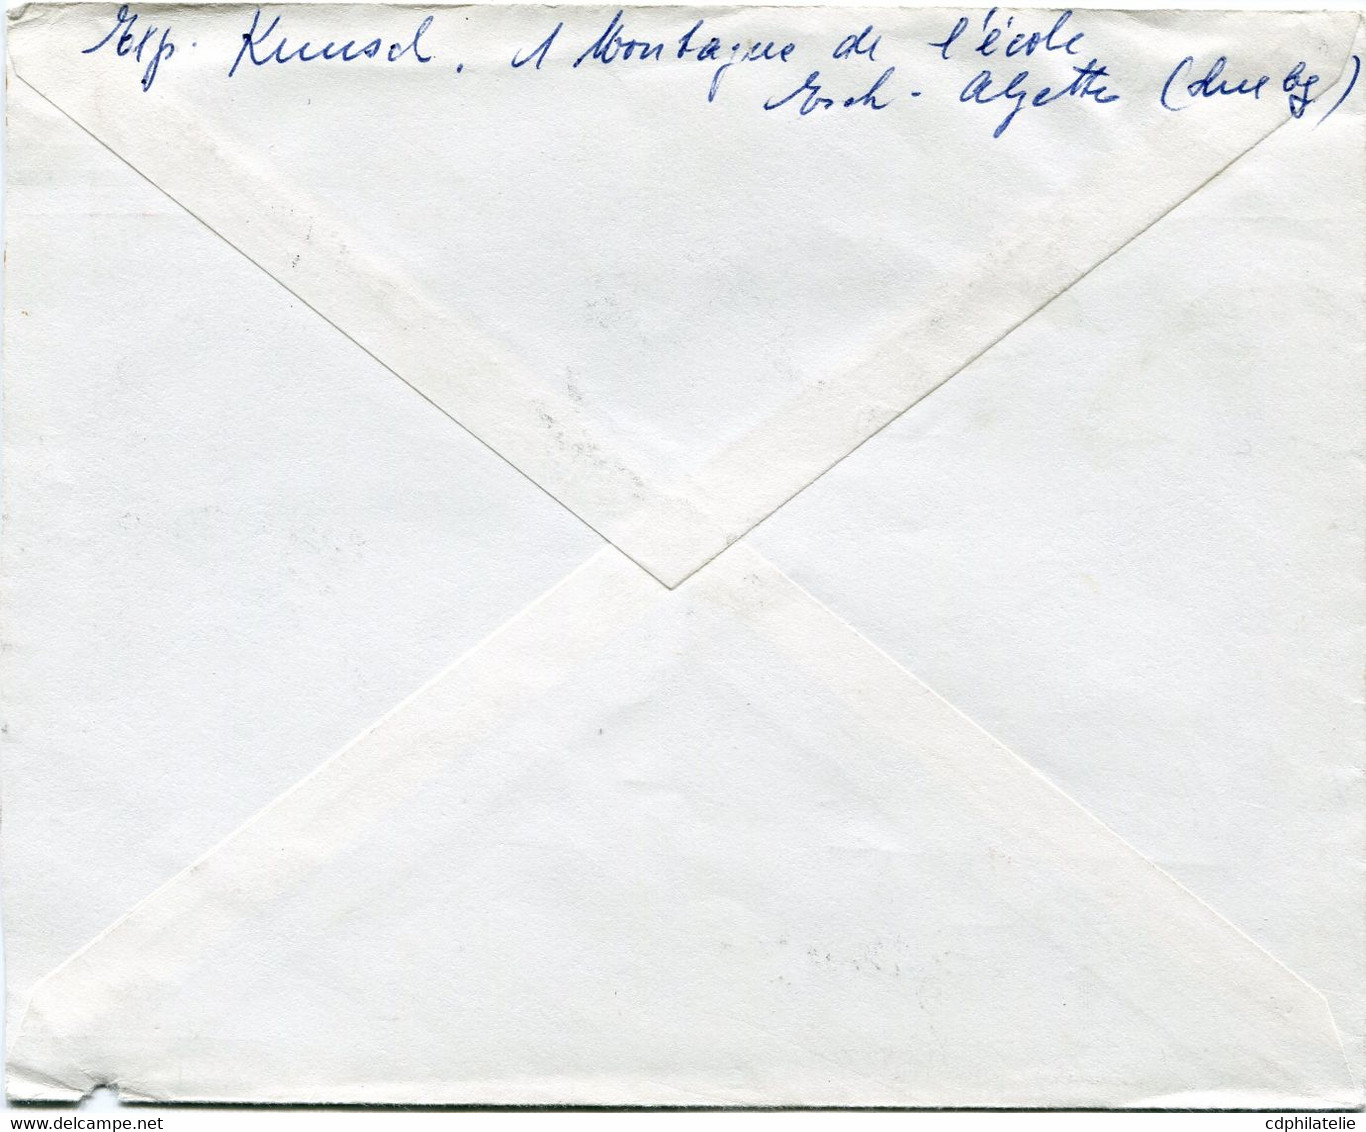 LUXEMBOURG LETTRE DEPART CARITAS 1969  8-12-69 LUXEMBOURG POUR LA FRANCE - Other & Unclassified